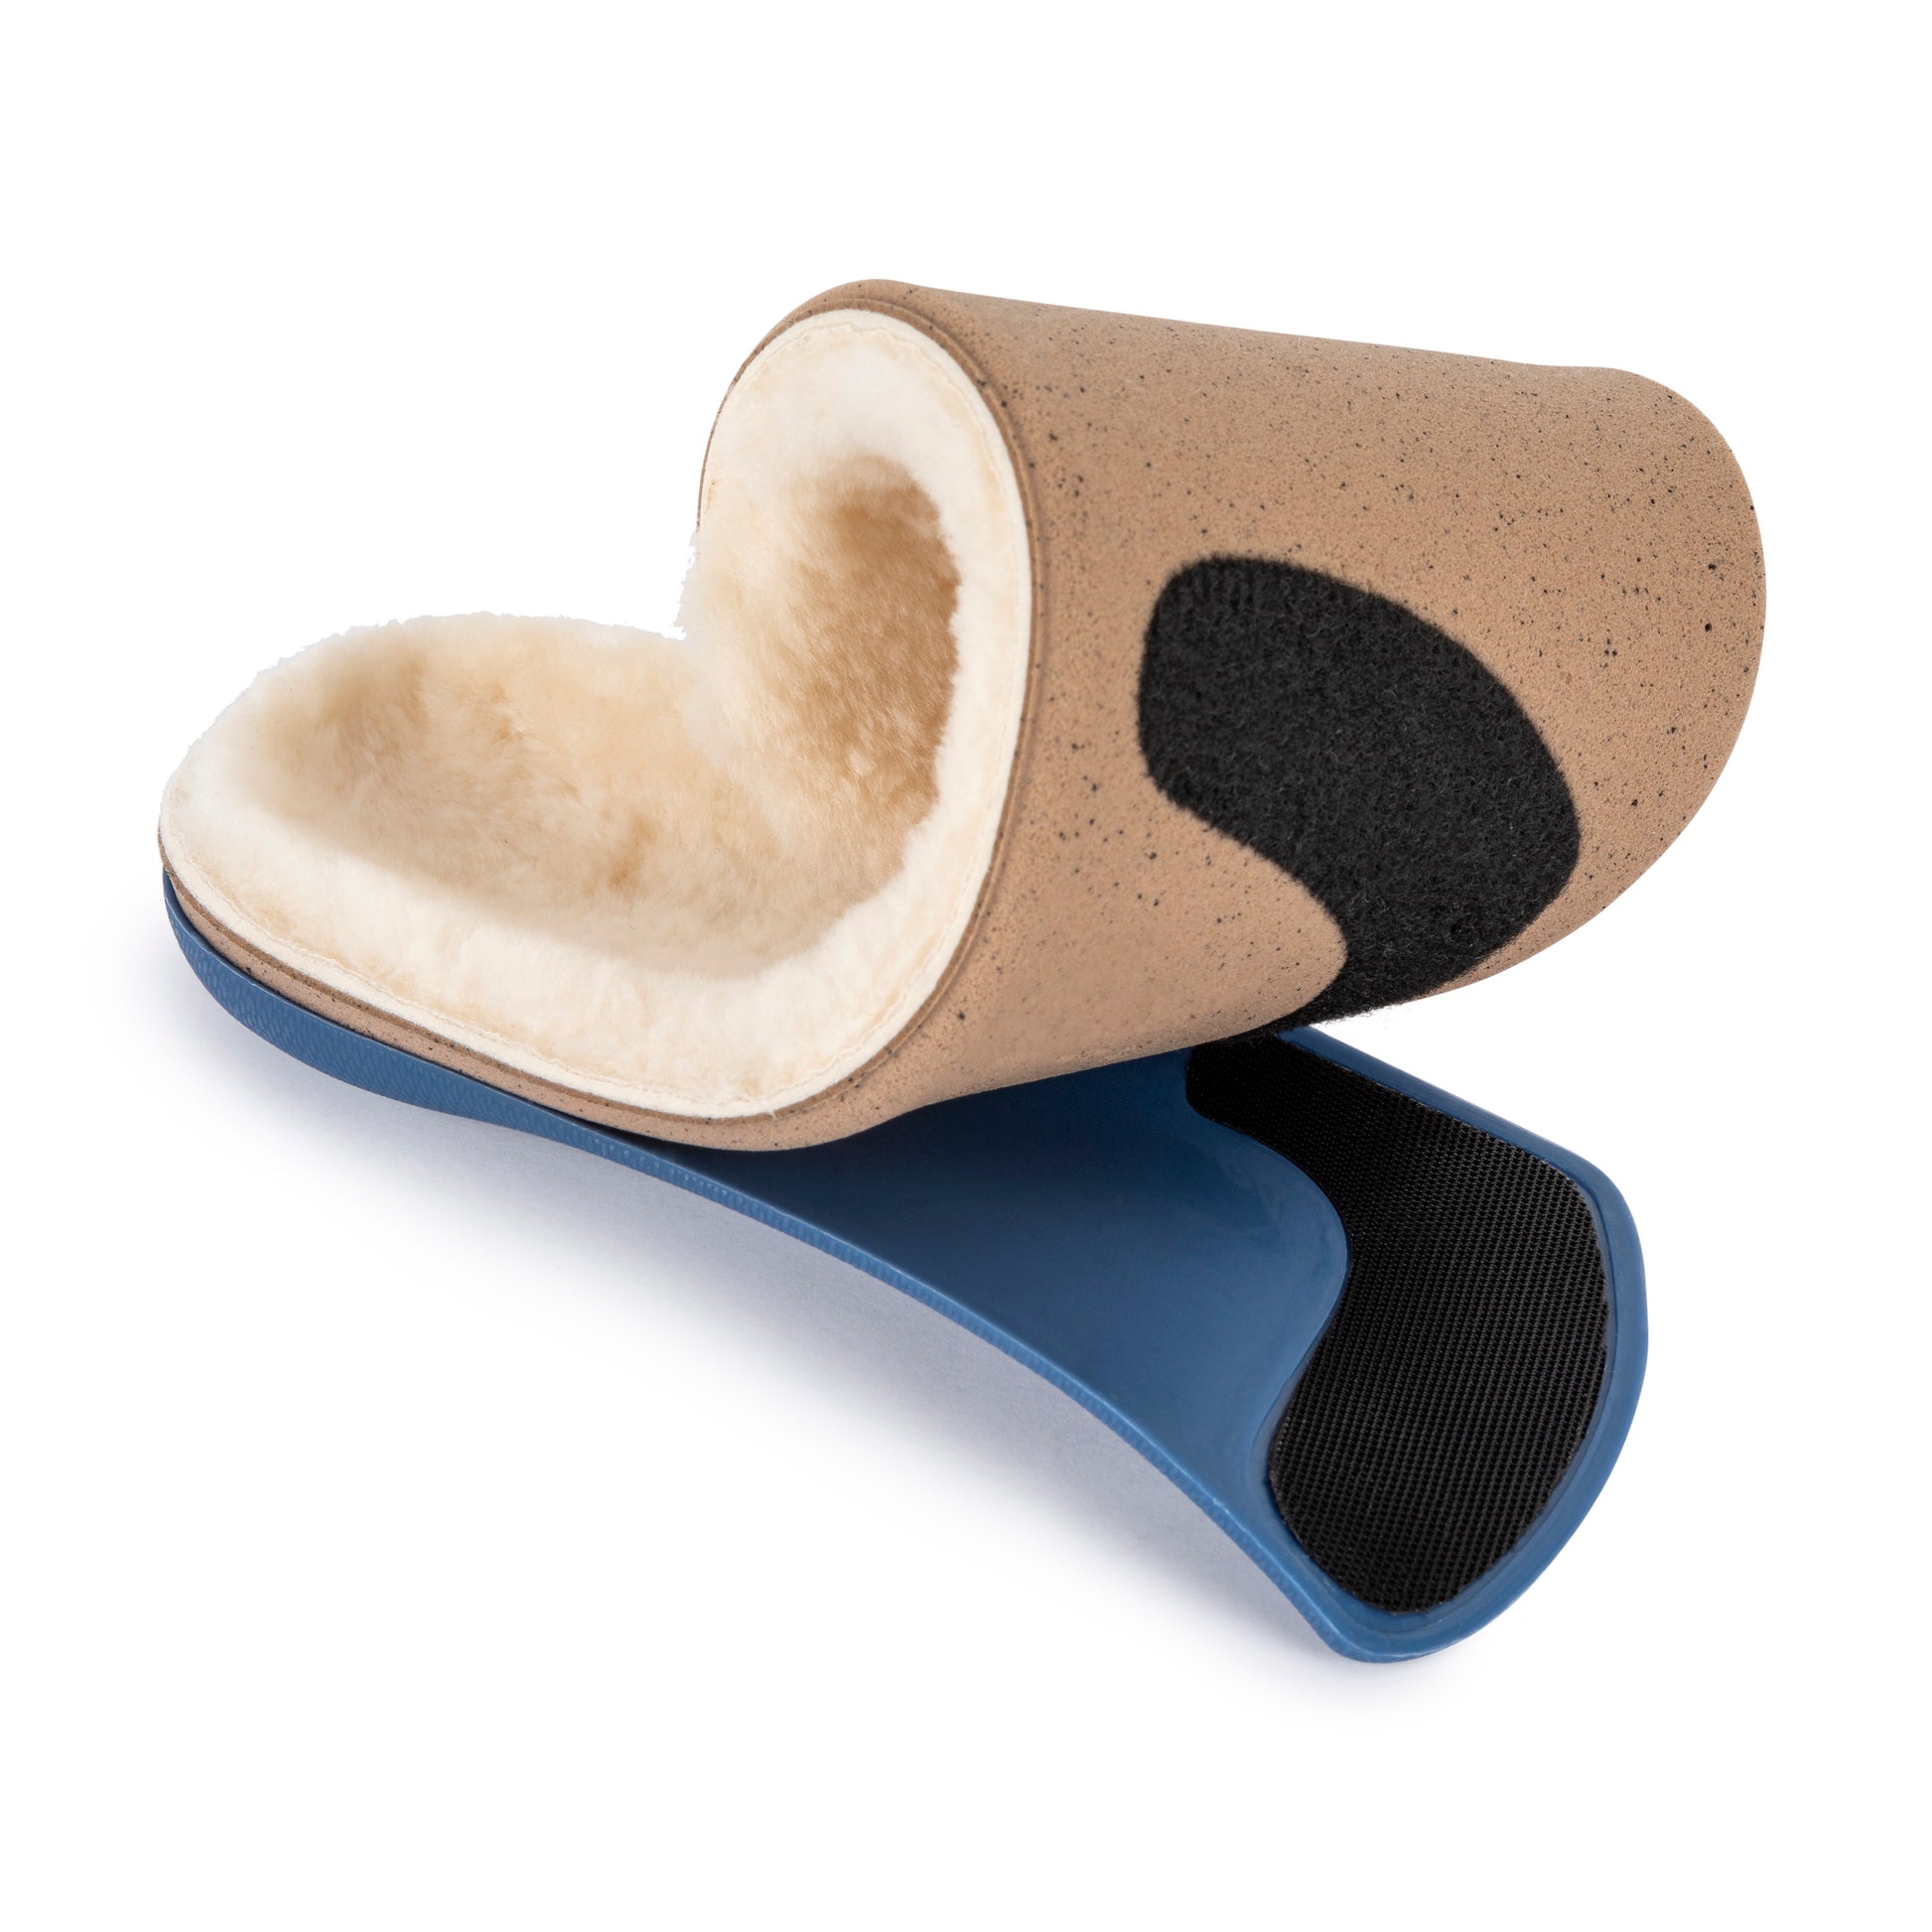 Shearling top covers on Pace orthotic insoles by Tread Labs